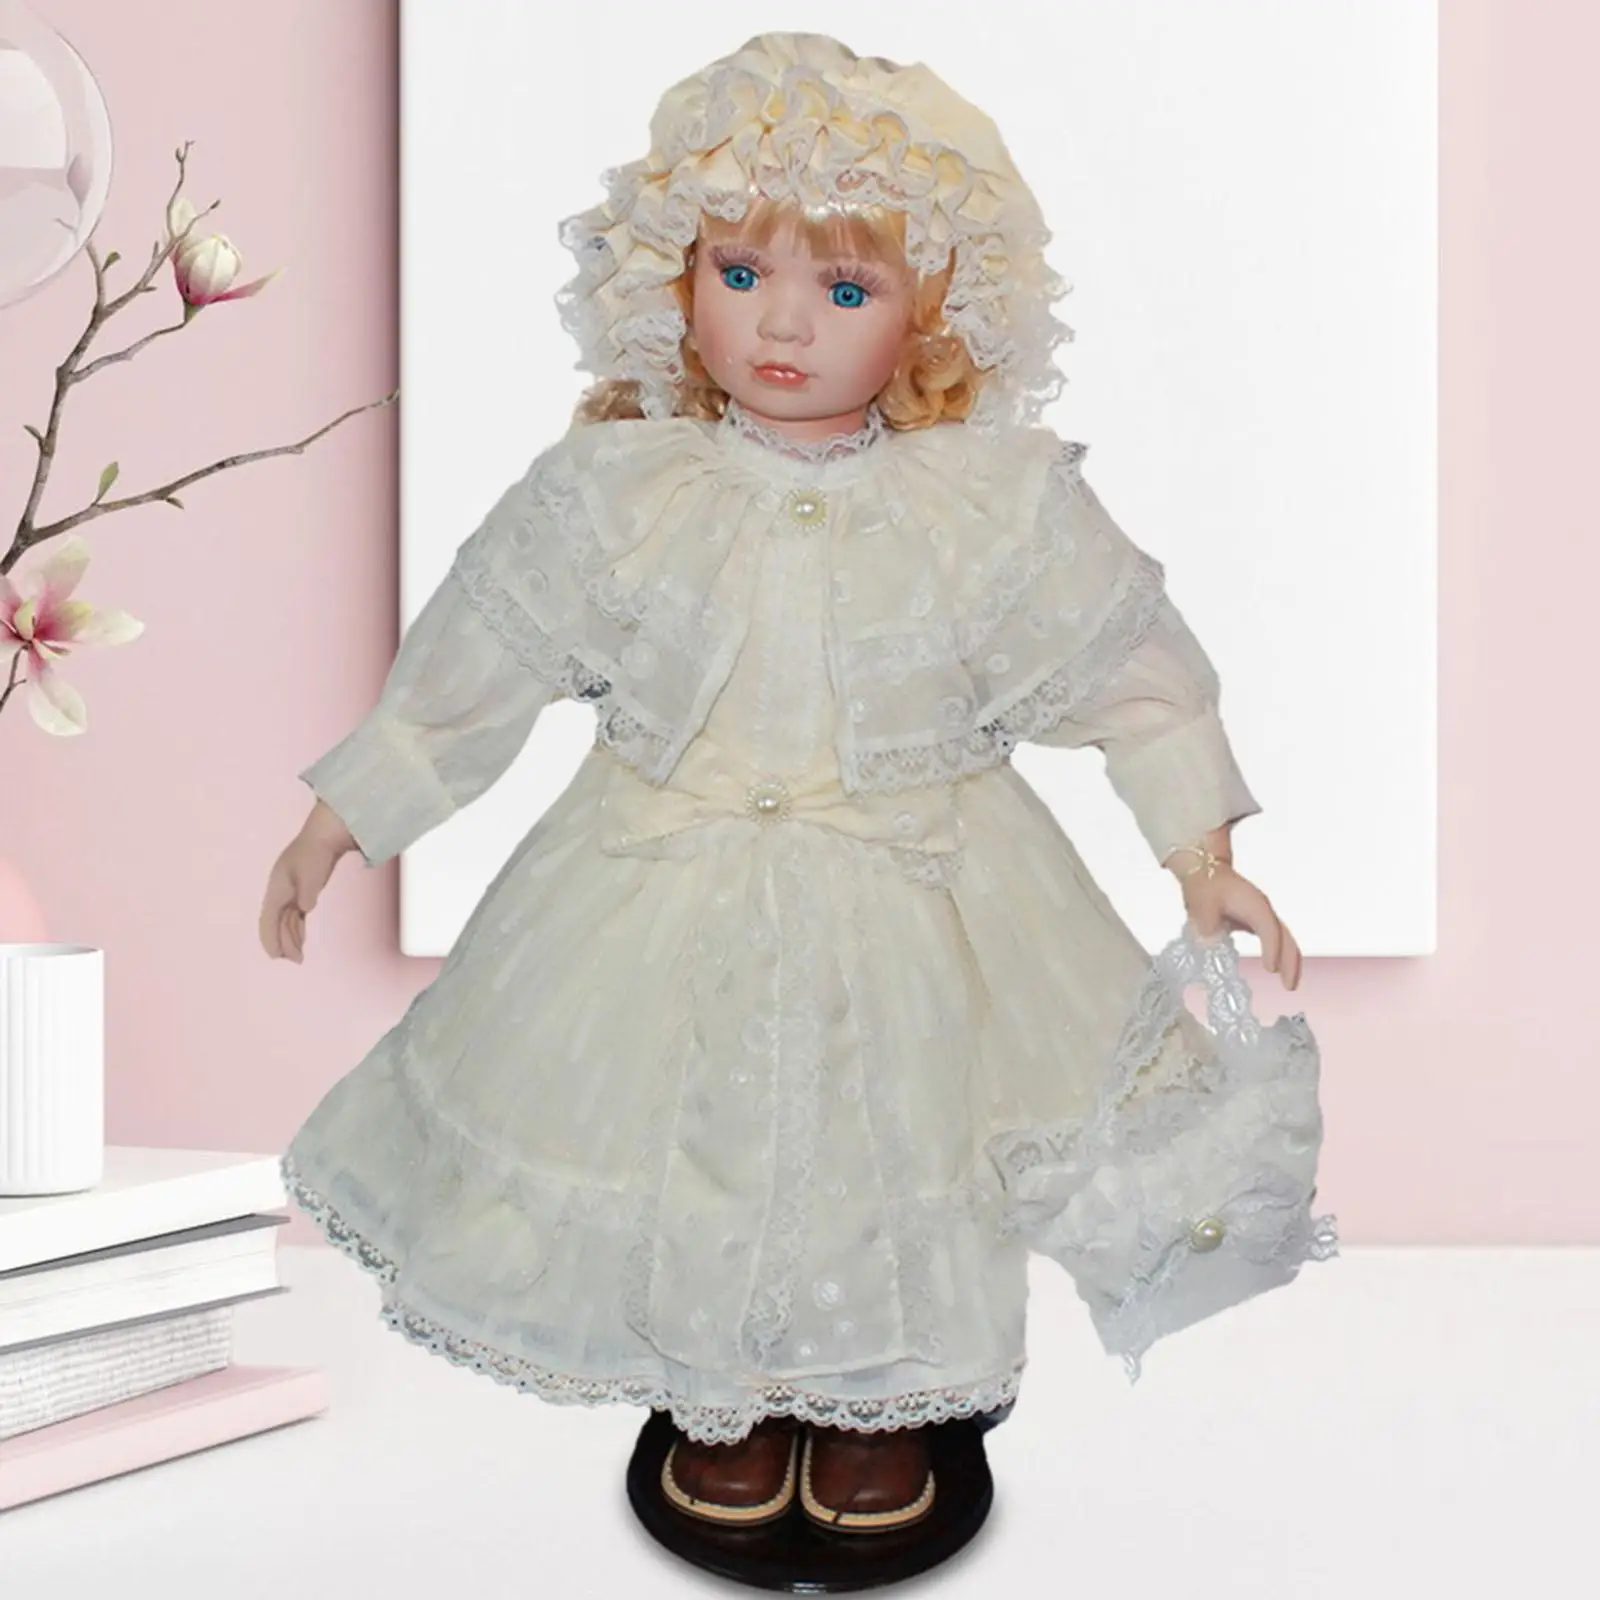 24inch Miniature Porcelain People Long Hair Girl Doll for Preschool Activity